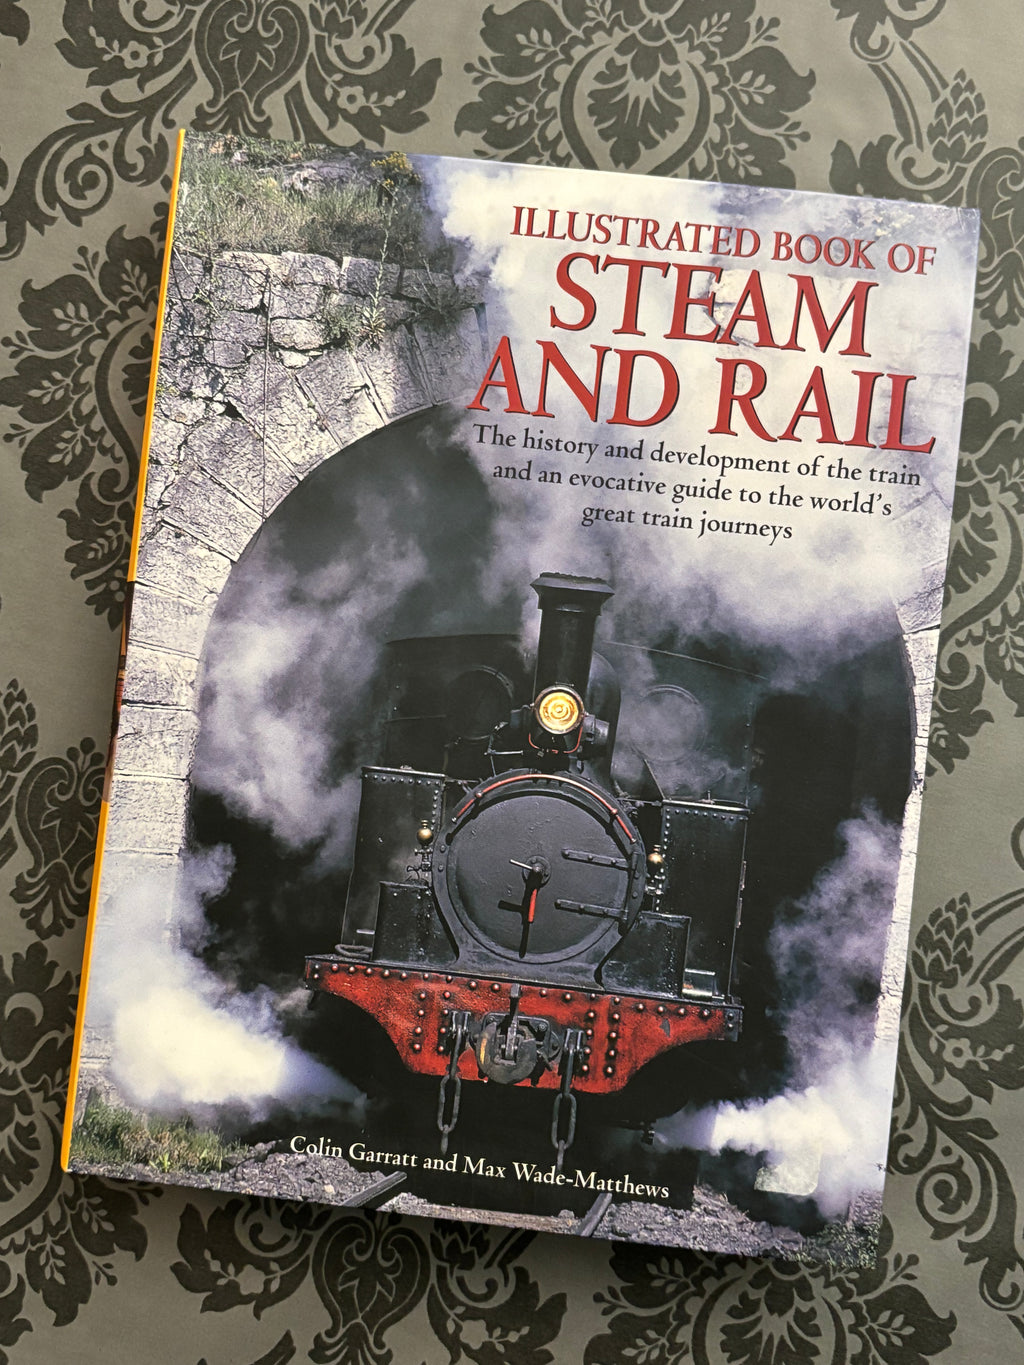 Illustrated Book of Steam and Rail: The History and Development of the Train and an Evocative Guide to the World's Great Train Journeys- By Colin Garratt and Max Wade-Matthews